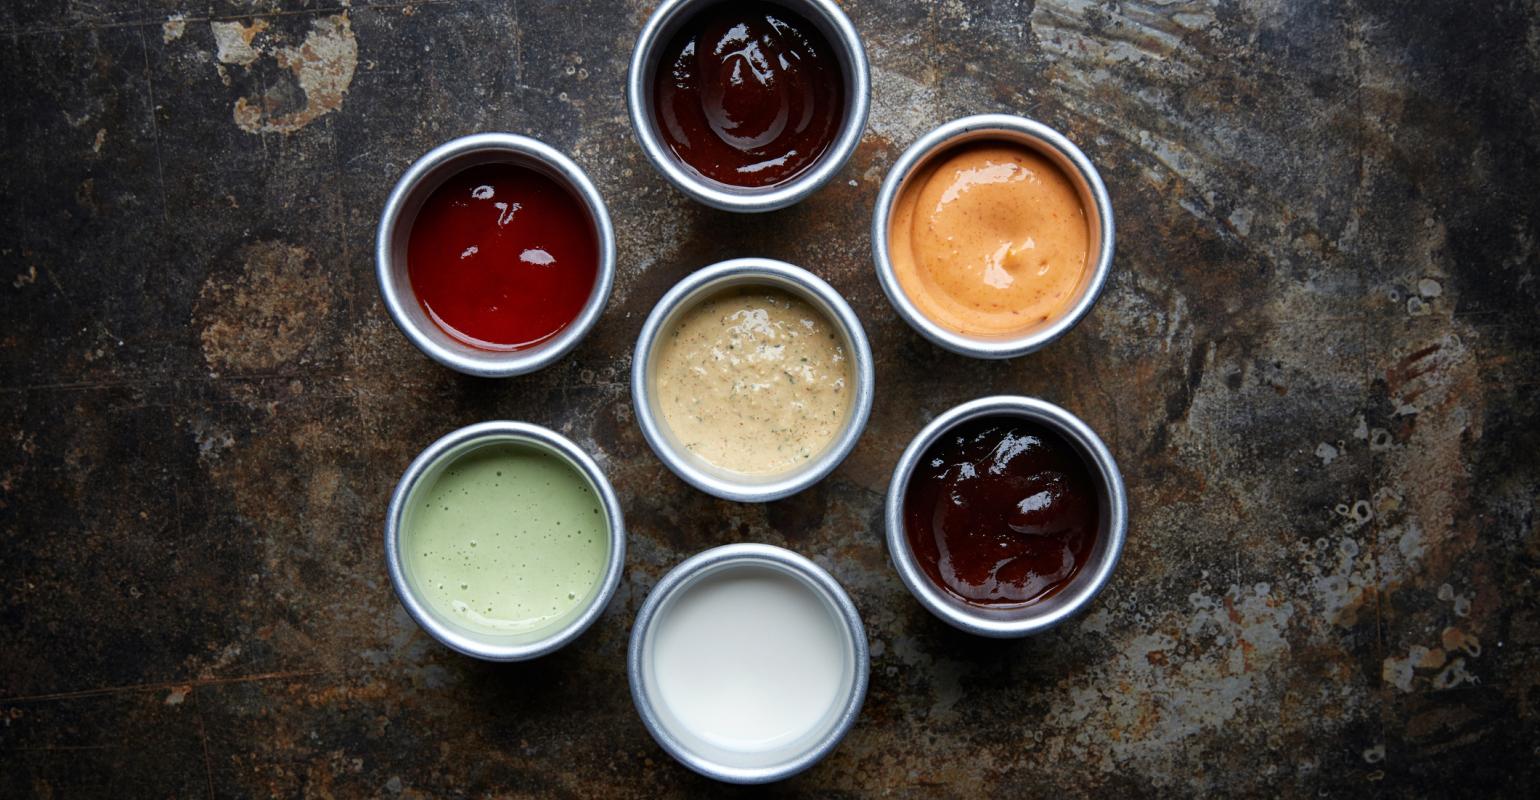 The Rise of the Dip: Sauces offer convenient meal customization